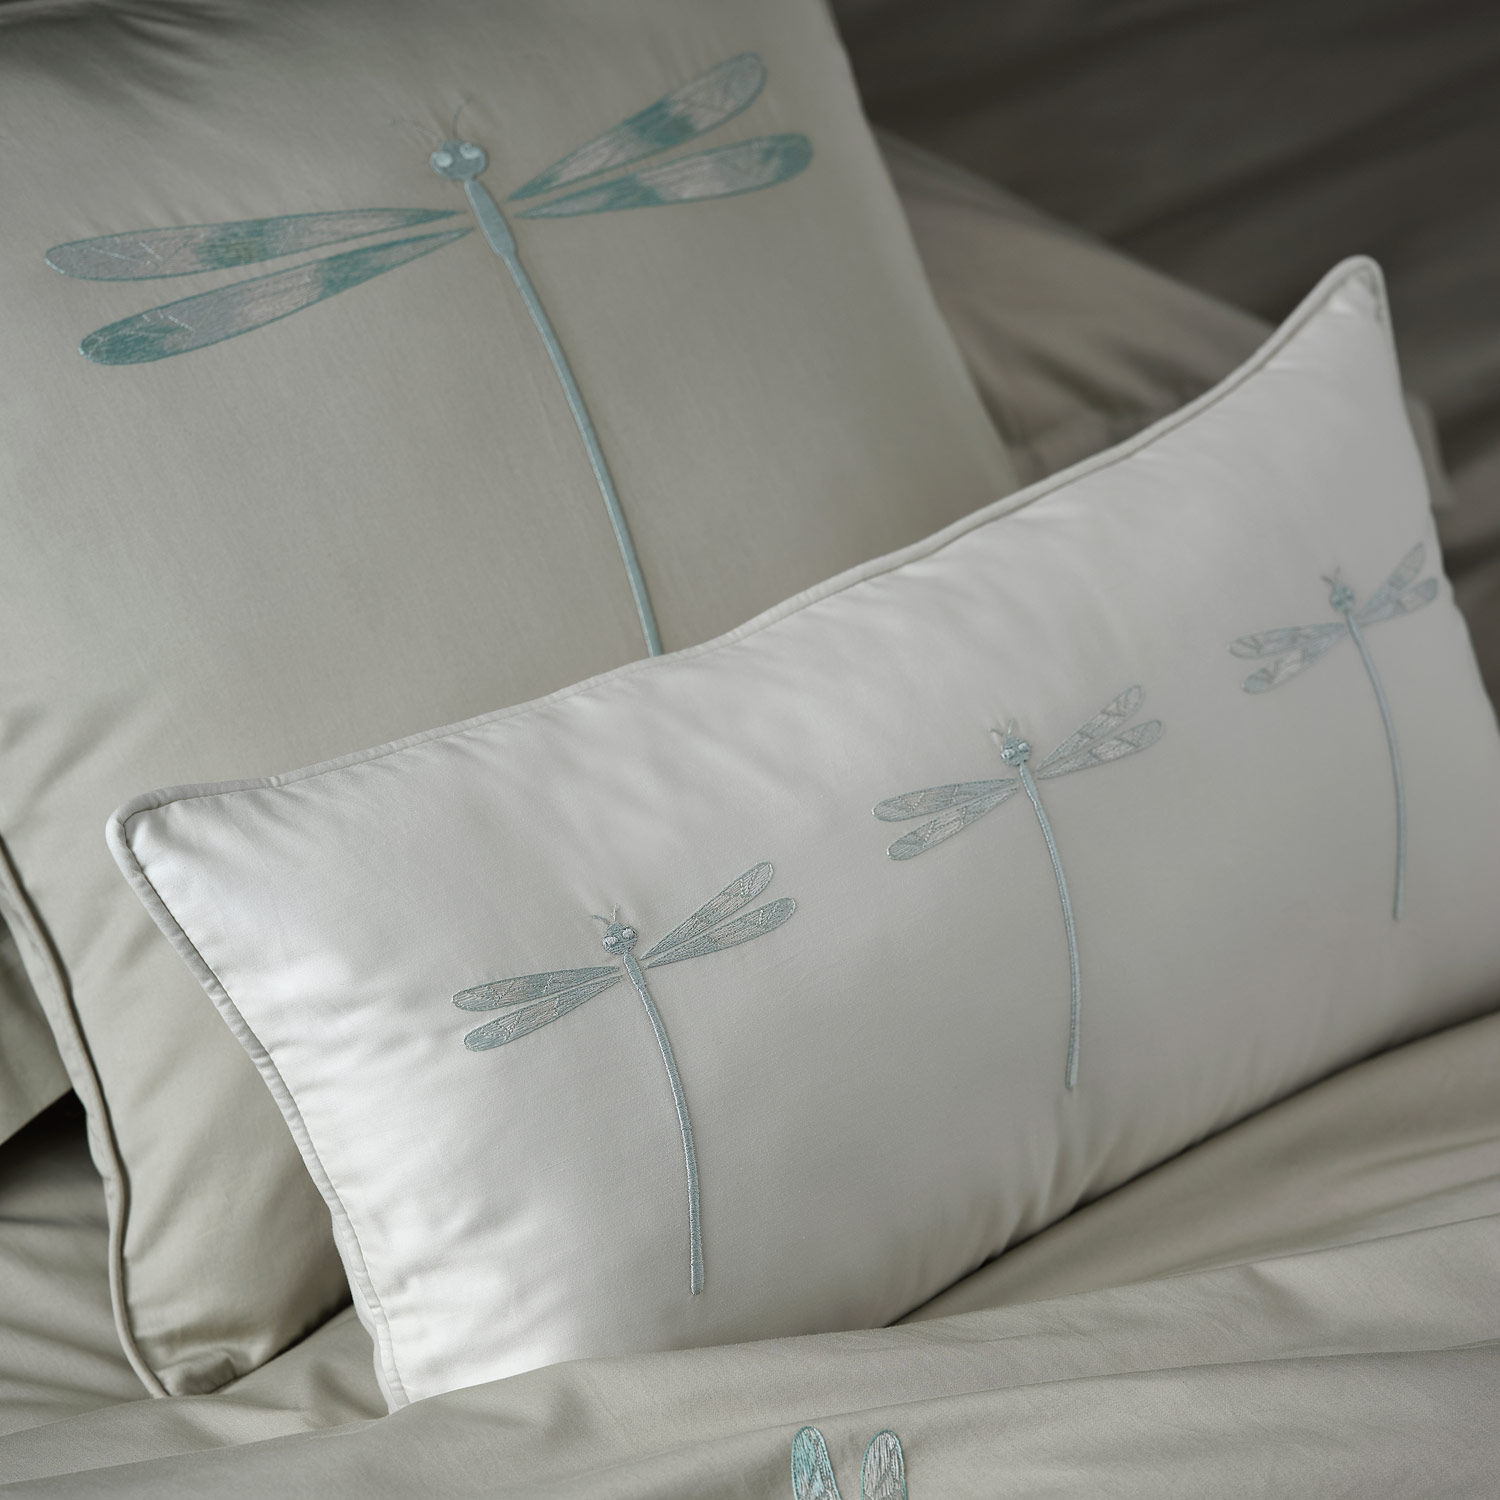 Dragonfly Cushion Cover